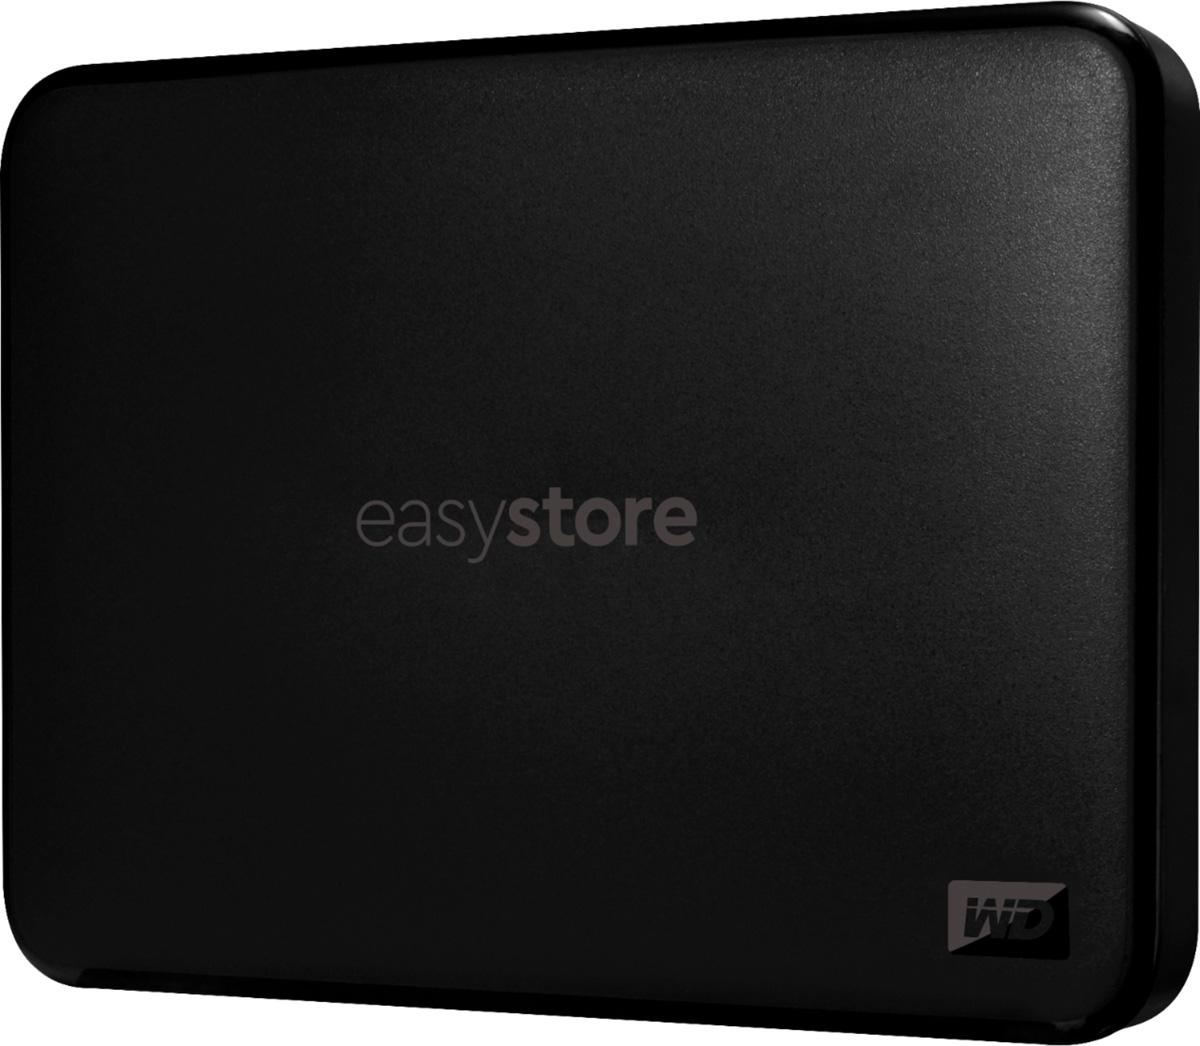 WD easystore 1TB USB 3.0 Portable Hard Drive for $44.99 Shipped